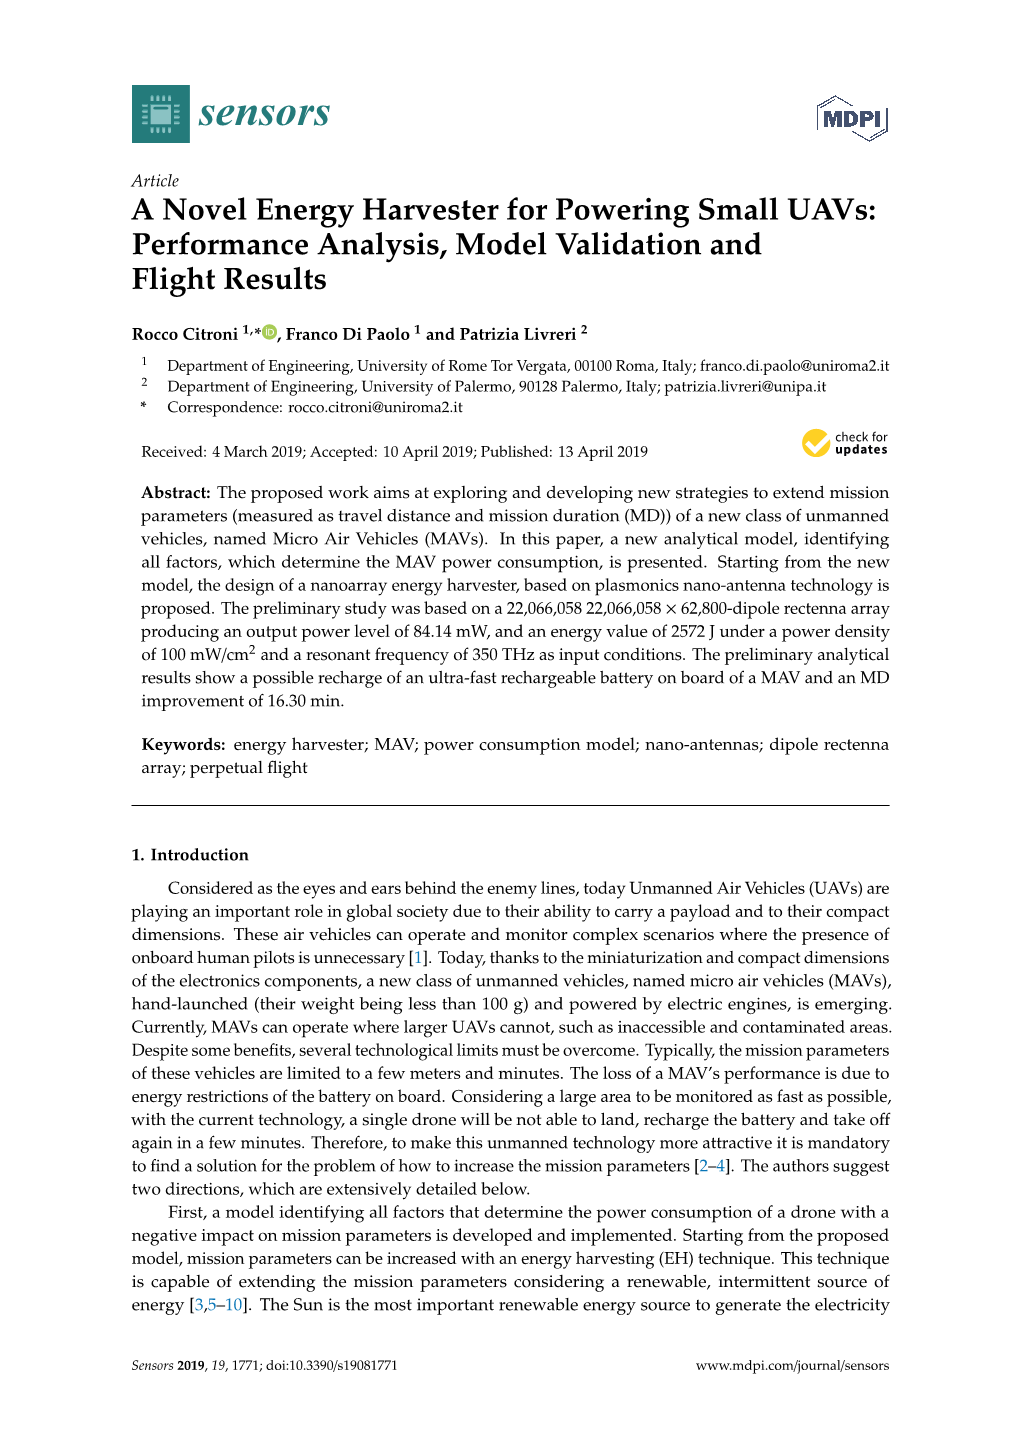 A Novel Energy Harvester for Powering Small Uavs: Performance Analysis, Model Validation and Flight Results